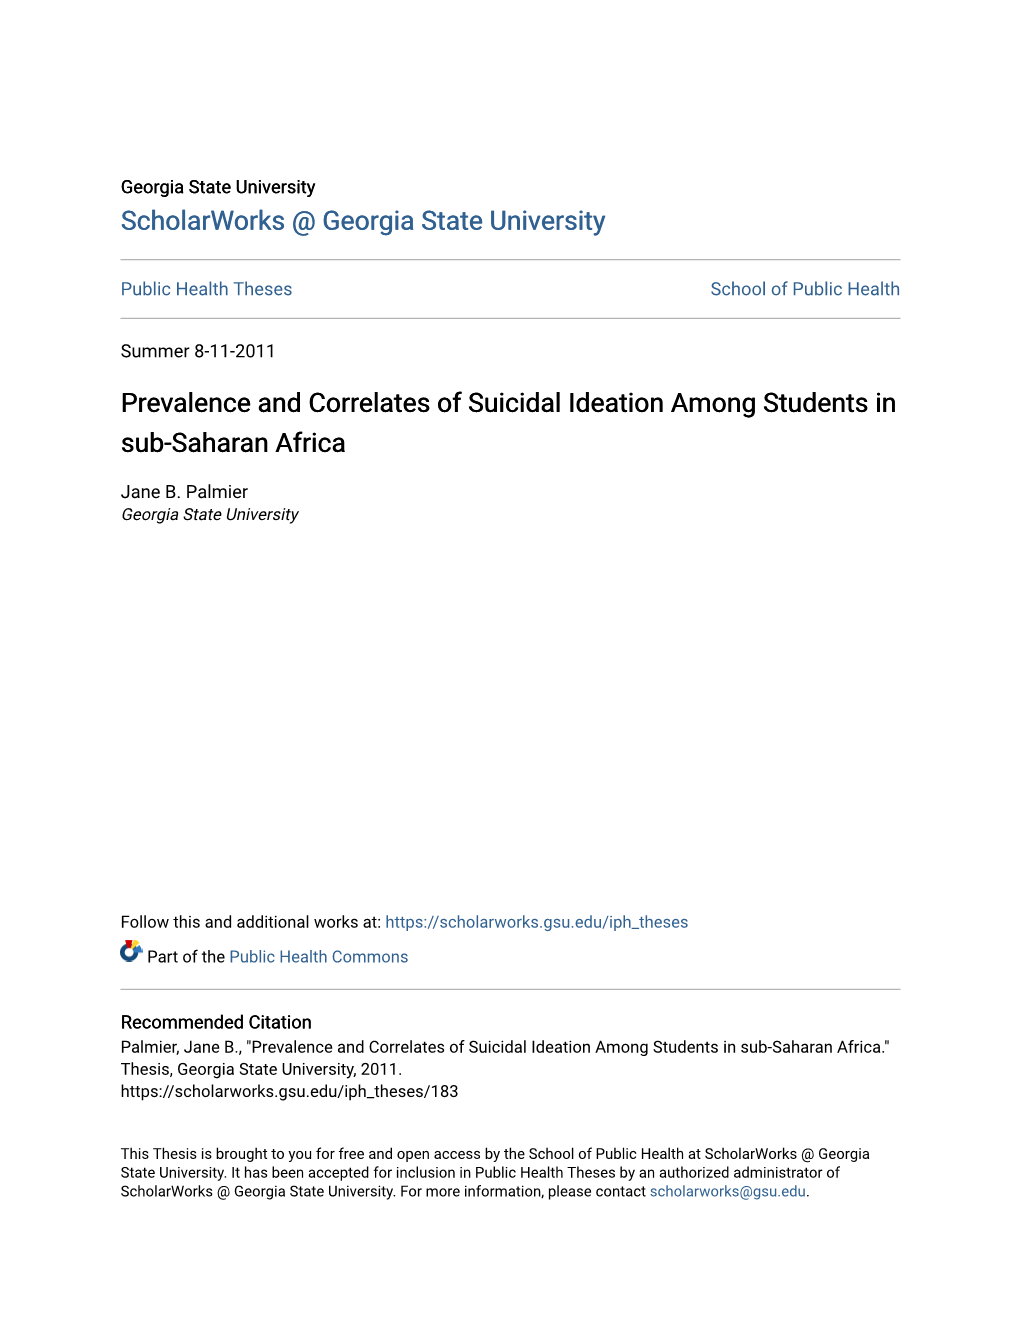 Prevalence and Correlates of Suicidal Ideation Among Students in Sub-Saharan Africa